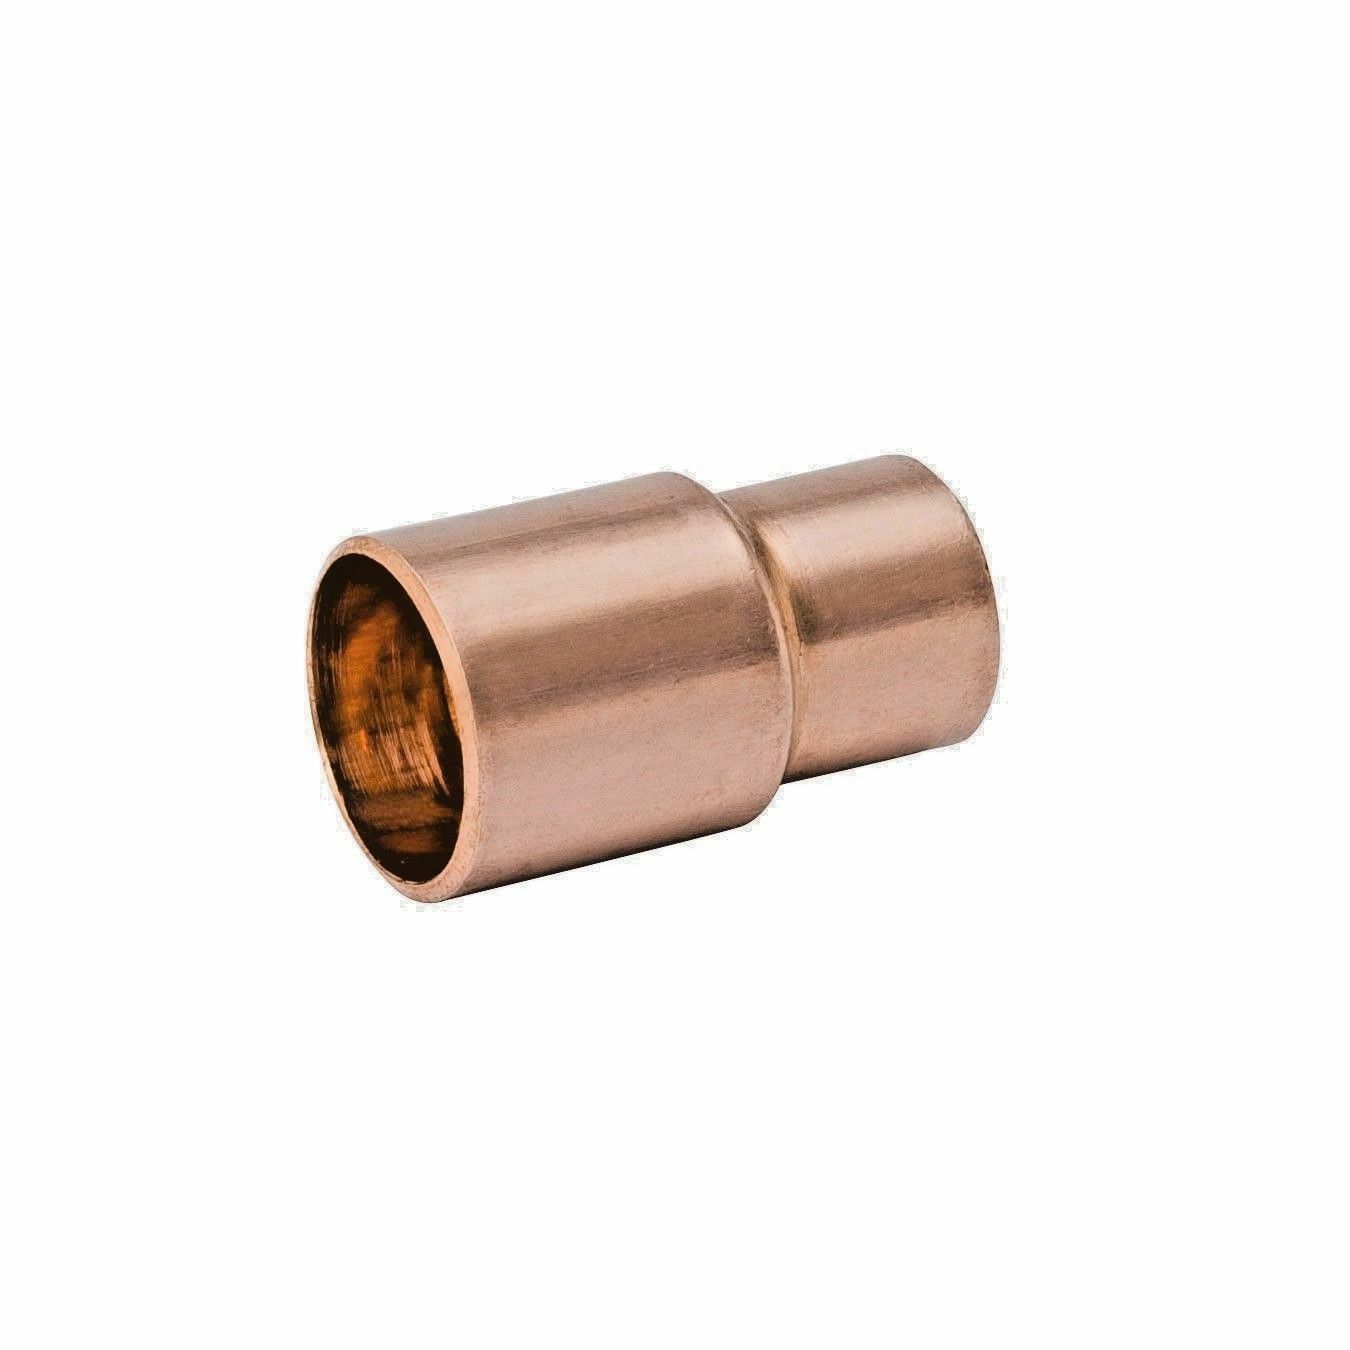 1 1 8 x 7  8 Copper  Coupling Reducer